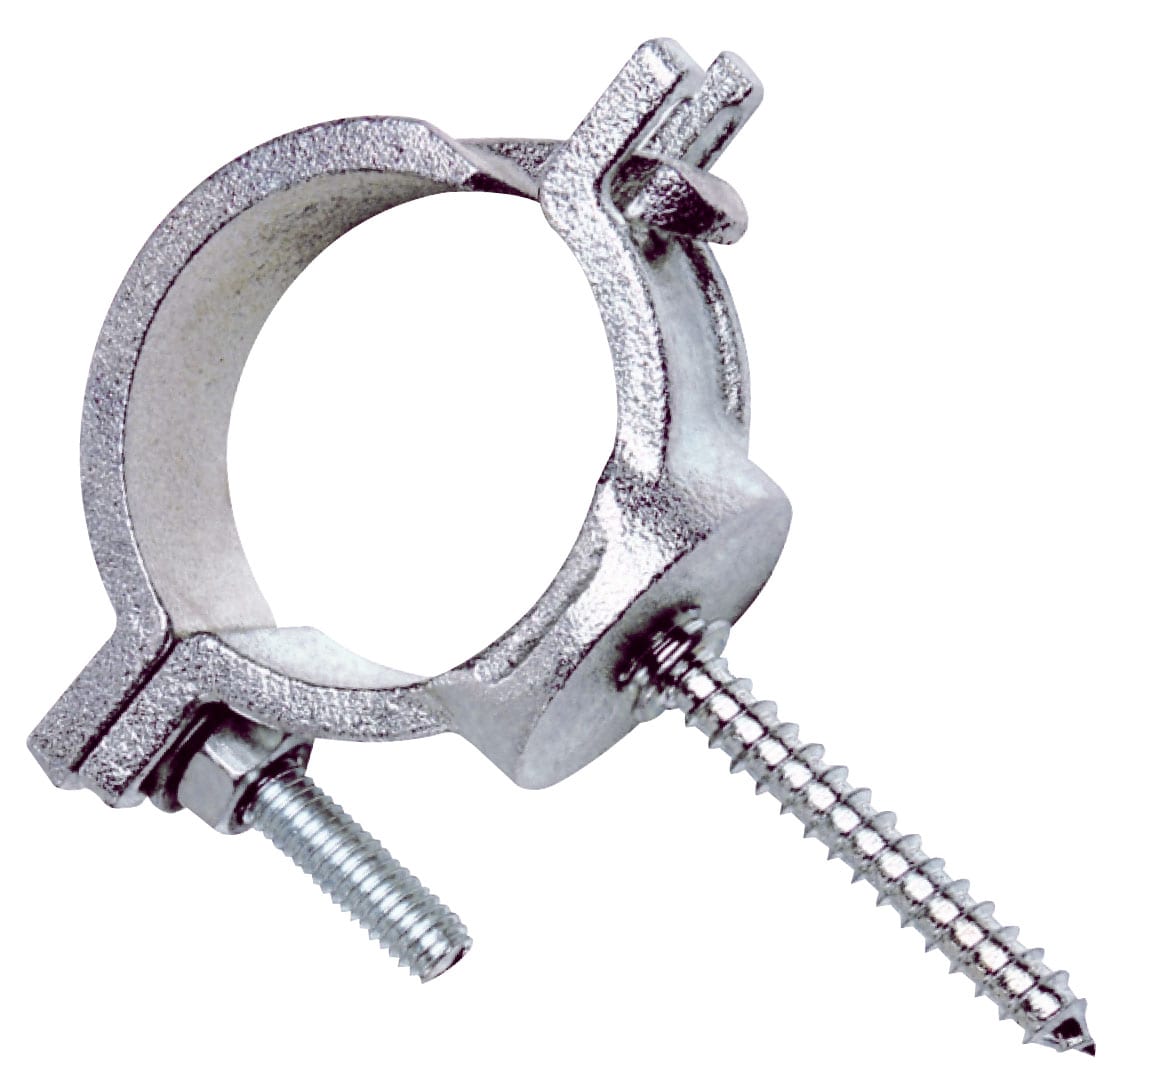 Cable Supports, Industrial Conduit Fittings